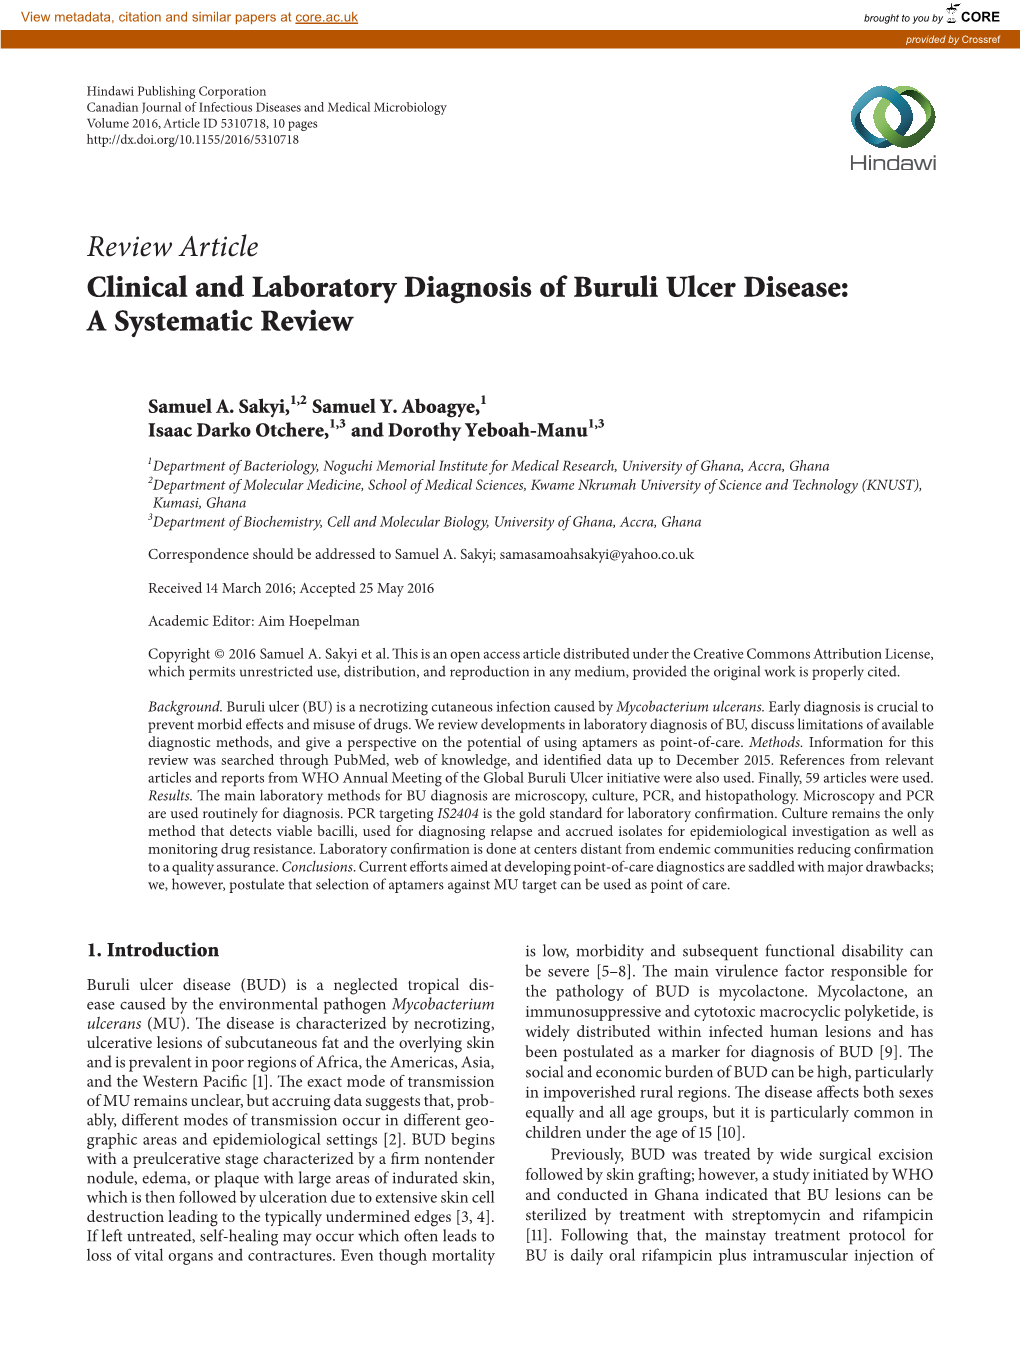 Review Article Clinical and Laboratory Diagnosis of Buruli Ulcer Disease: a Systematic Review